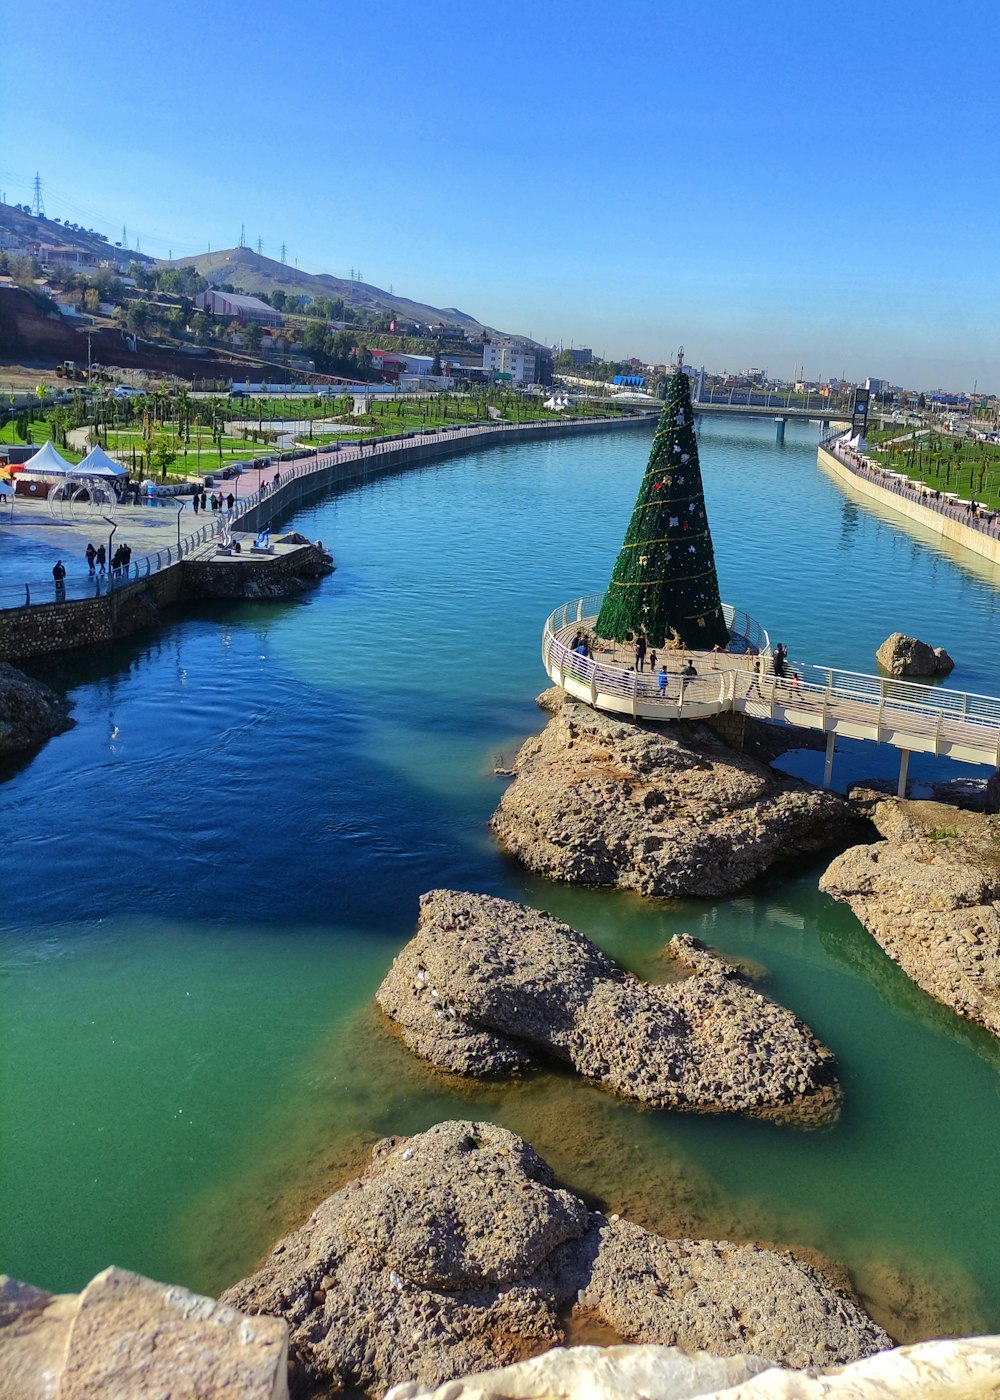 a river with a christmas tree in the middle of it